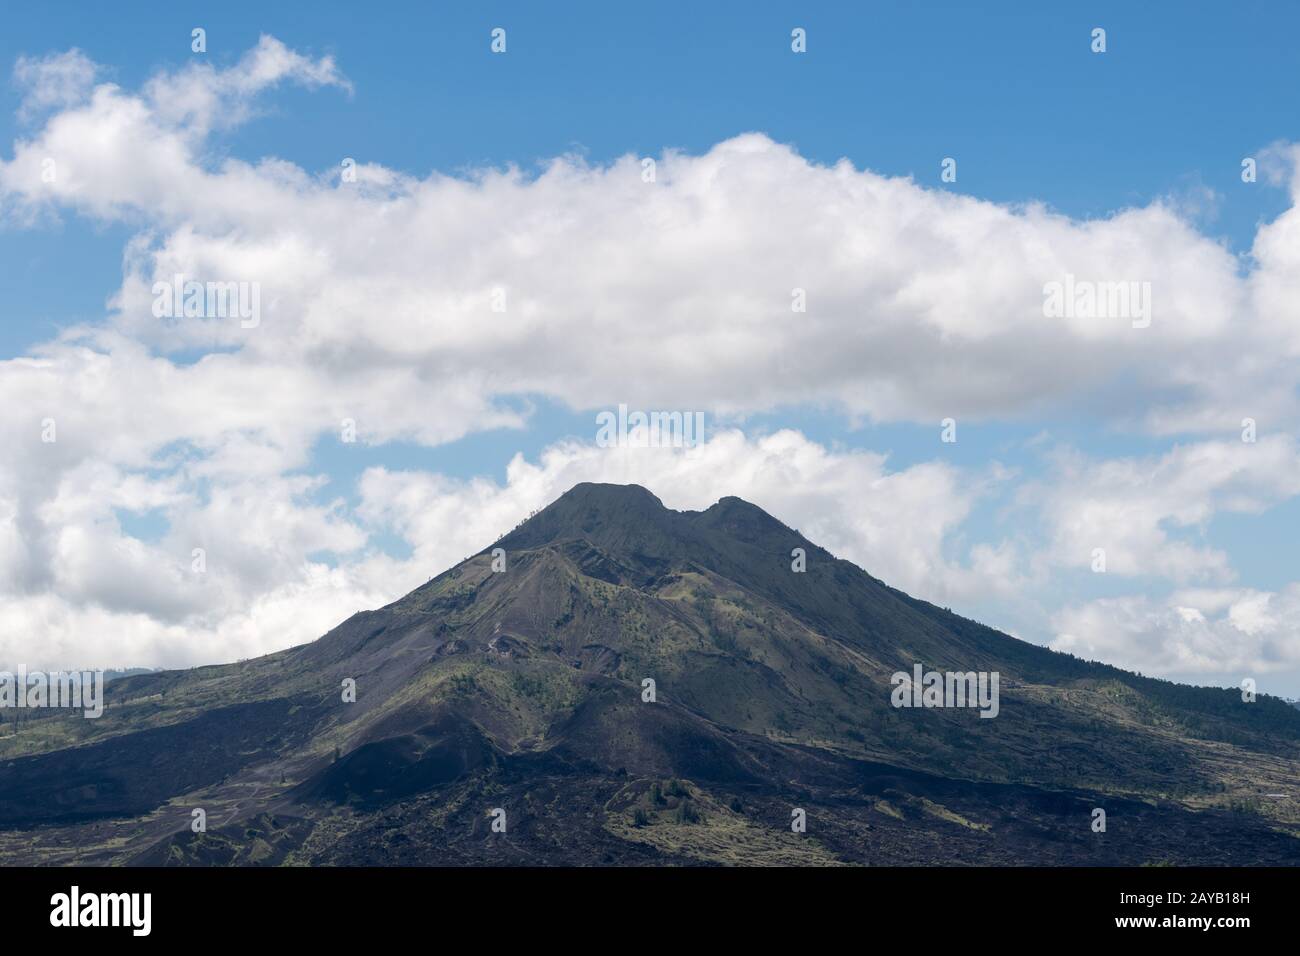 Mount Agung volcano against a blue sky Stock Photo